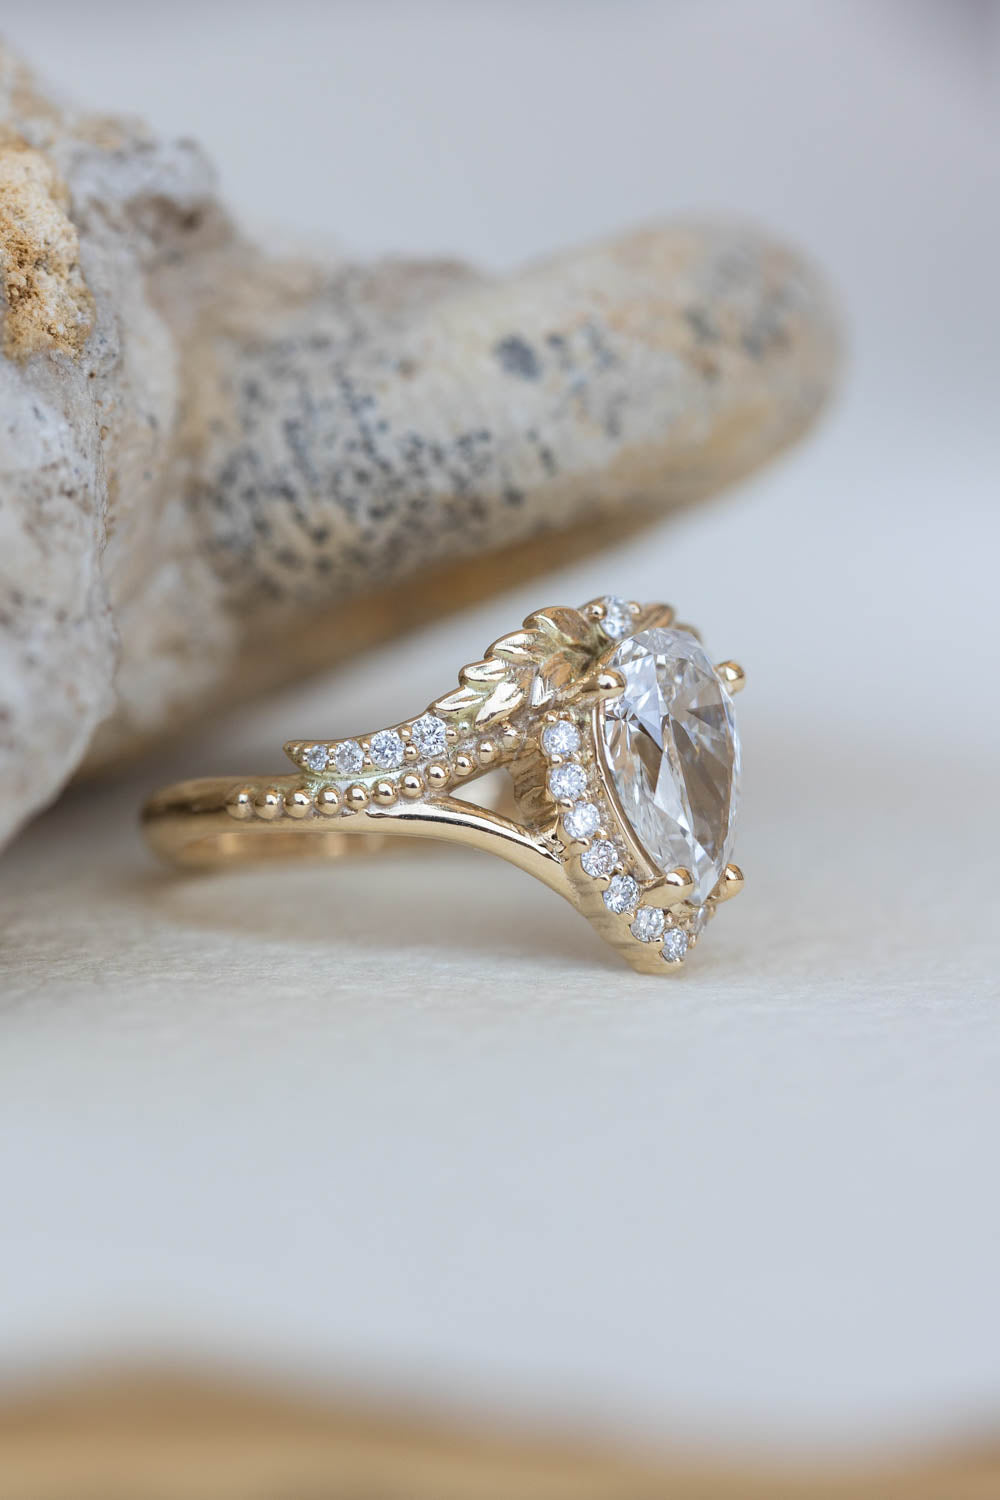 READY TO SHIP: Lyonella ring in 14K yellow gold, lab grown diamond pear cut 9x6* mm, accents lab grown diamonds, AVAILABLE RING SIZES: 6-8US - Eden Garden Jewelry™